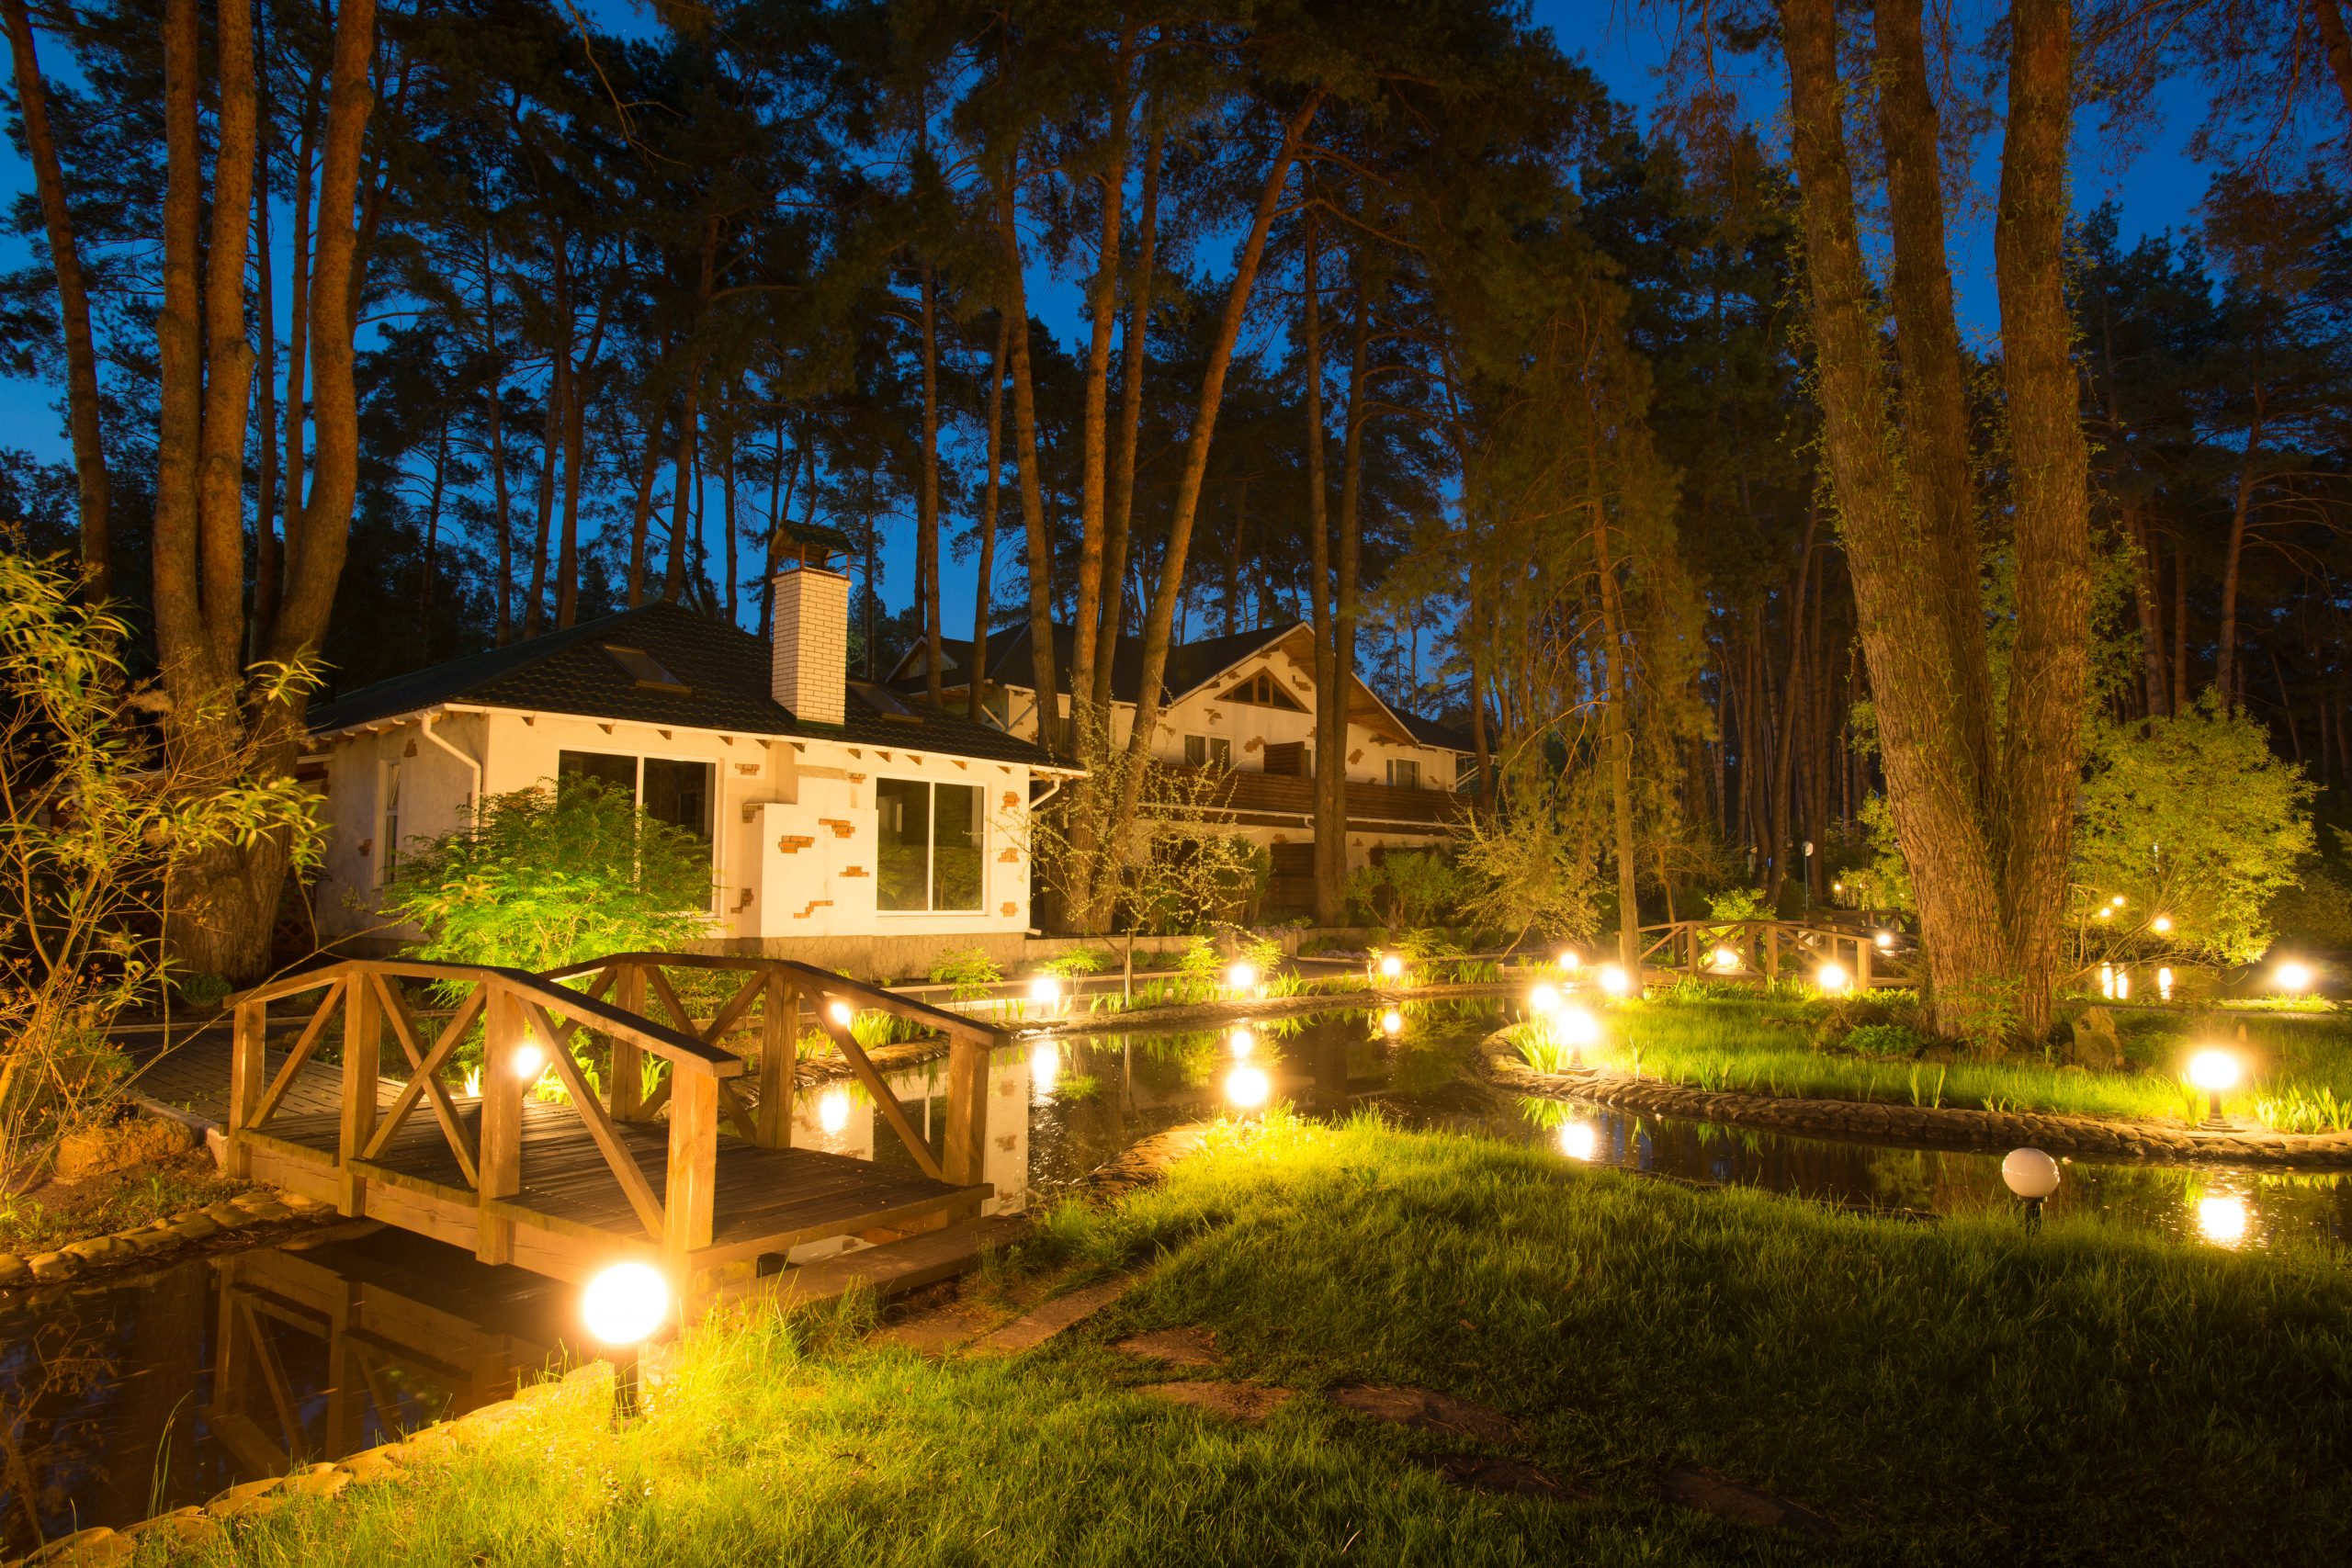 A tranquil night scene with a well-lit garden by a pond and a cozy house amidst tall trees.